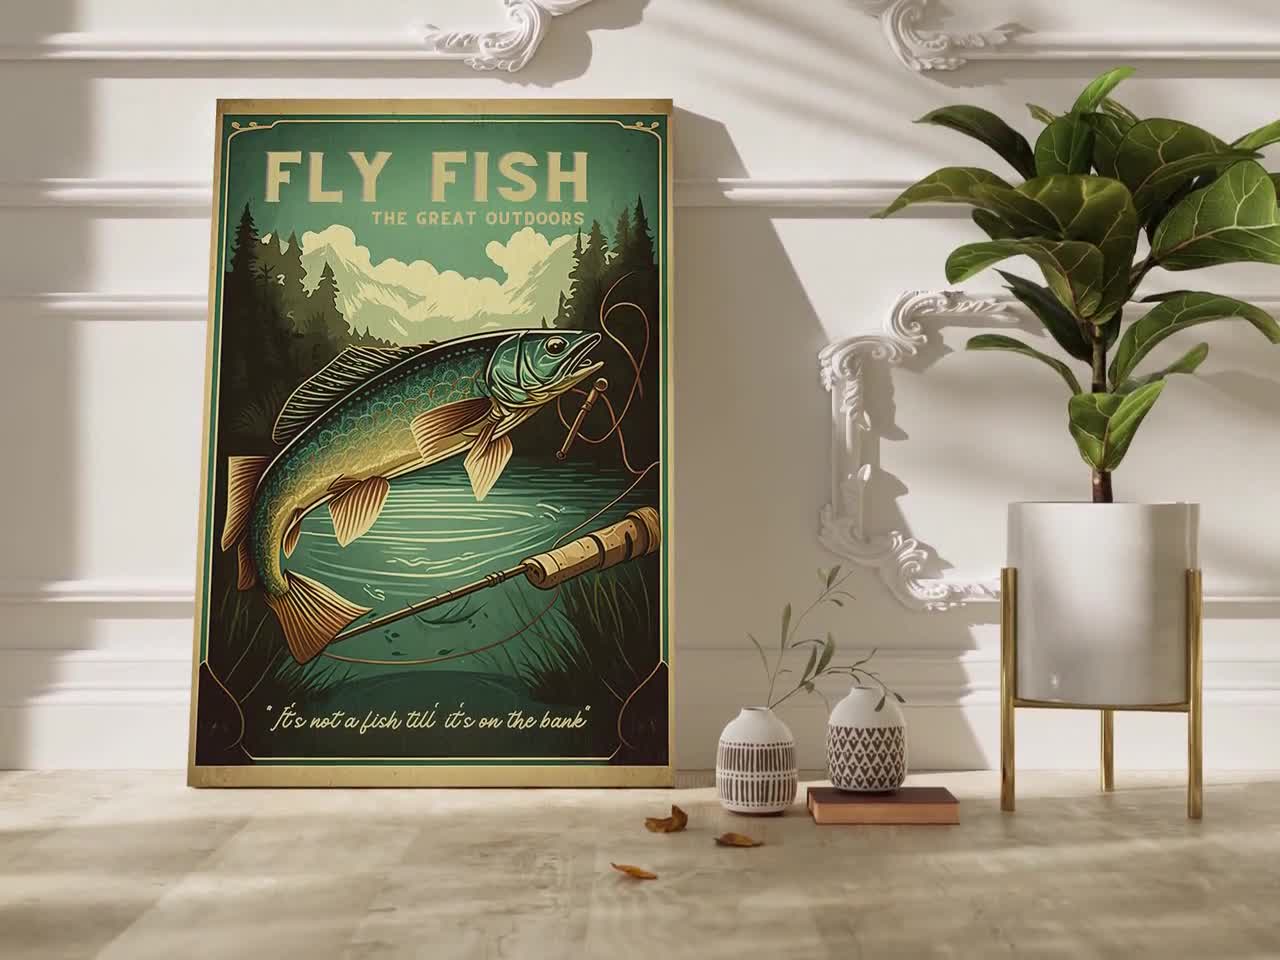  New Zealand Fly Fishing 1930s Vintage Style Travel Poster  For  Gifts and Wall Art Decor for Living Room, Office, Bedroom, Kitchen, Study  Room, Bathroom (24x36) : Handmade Products